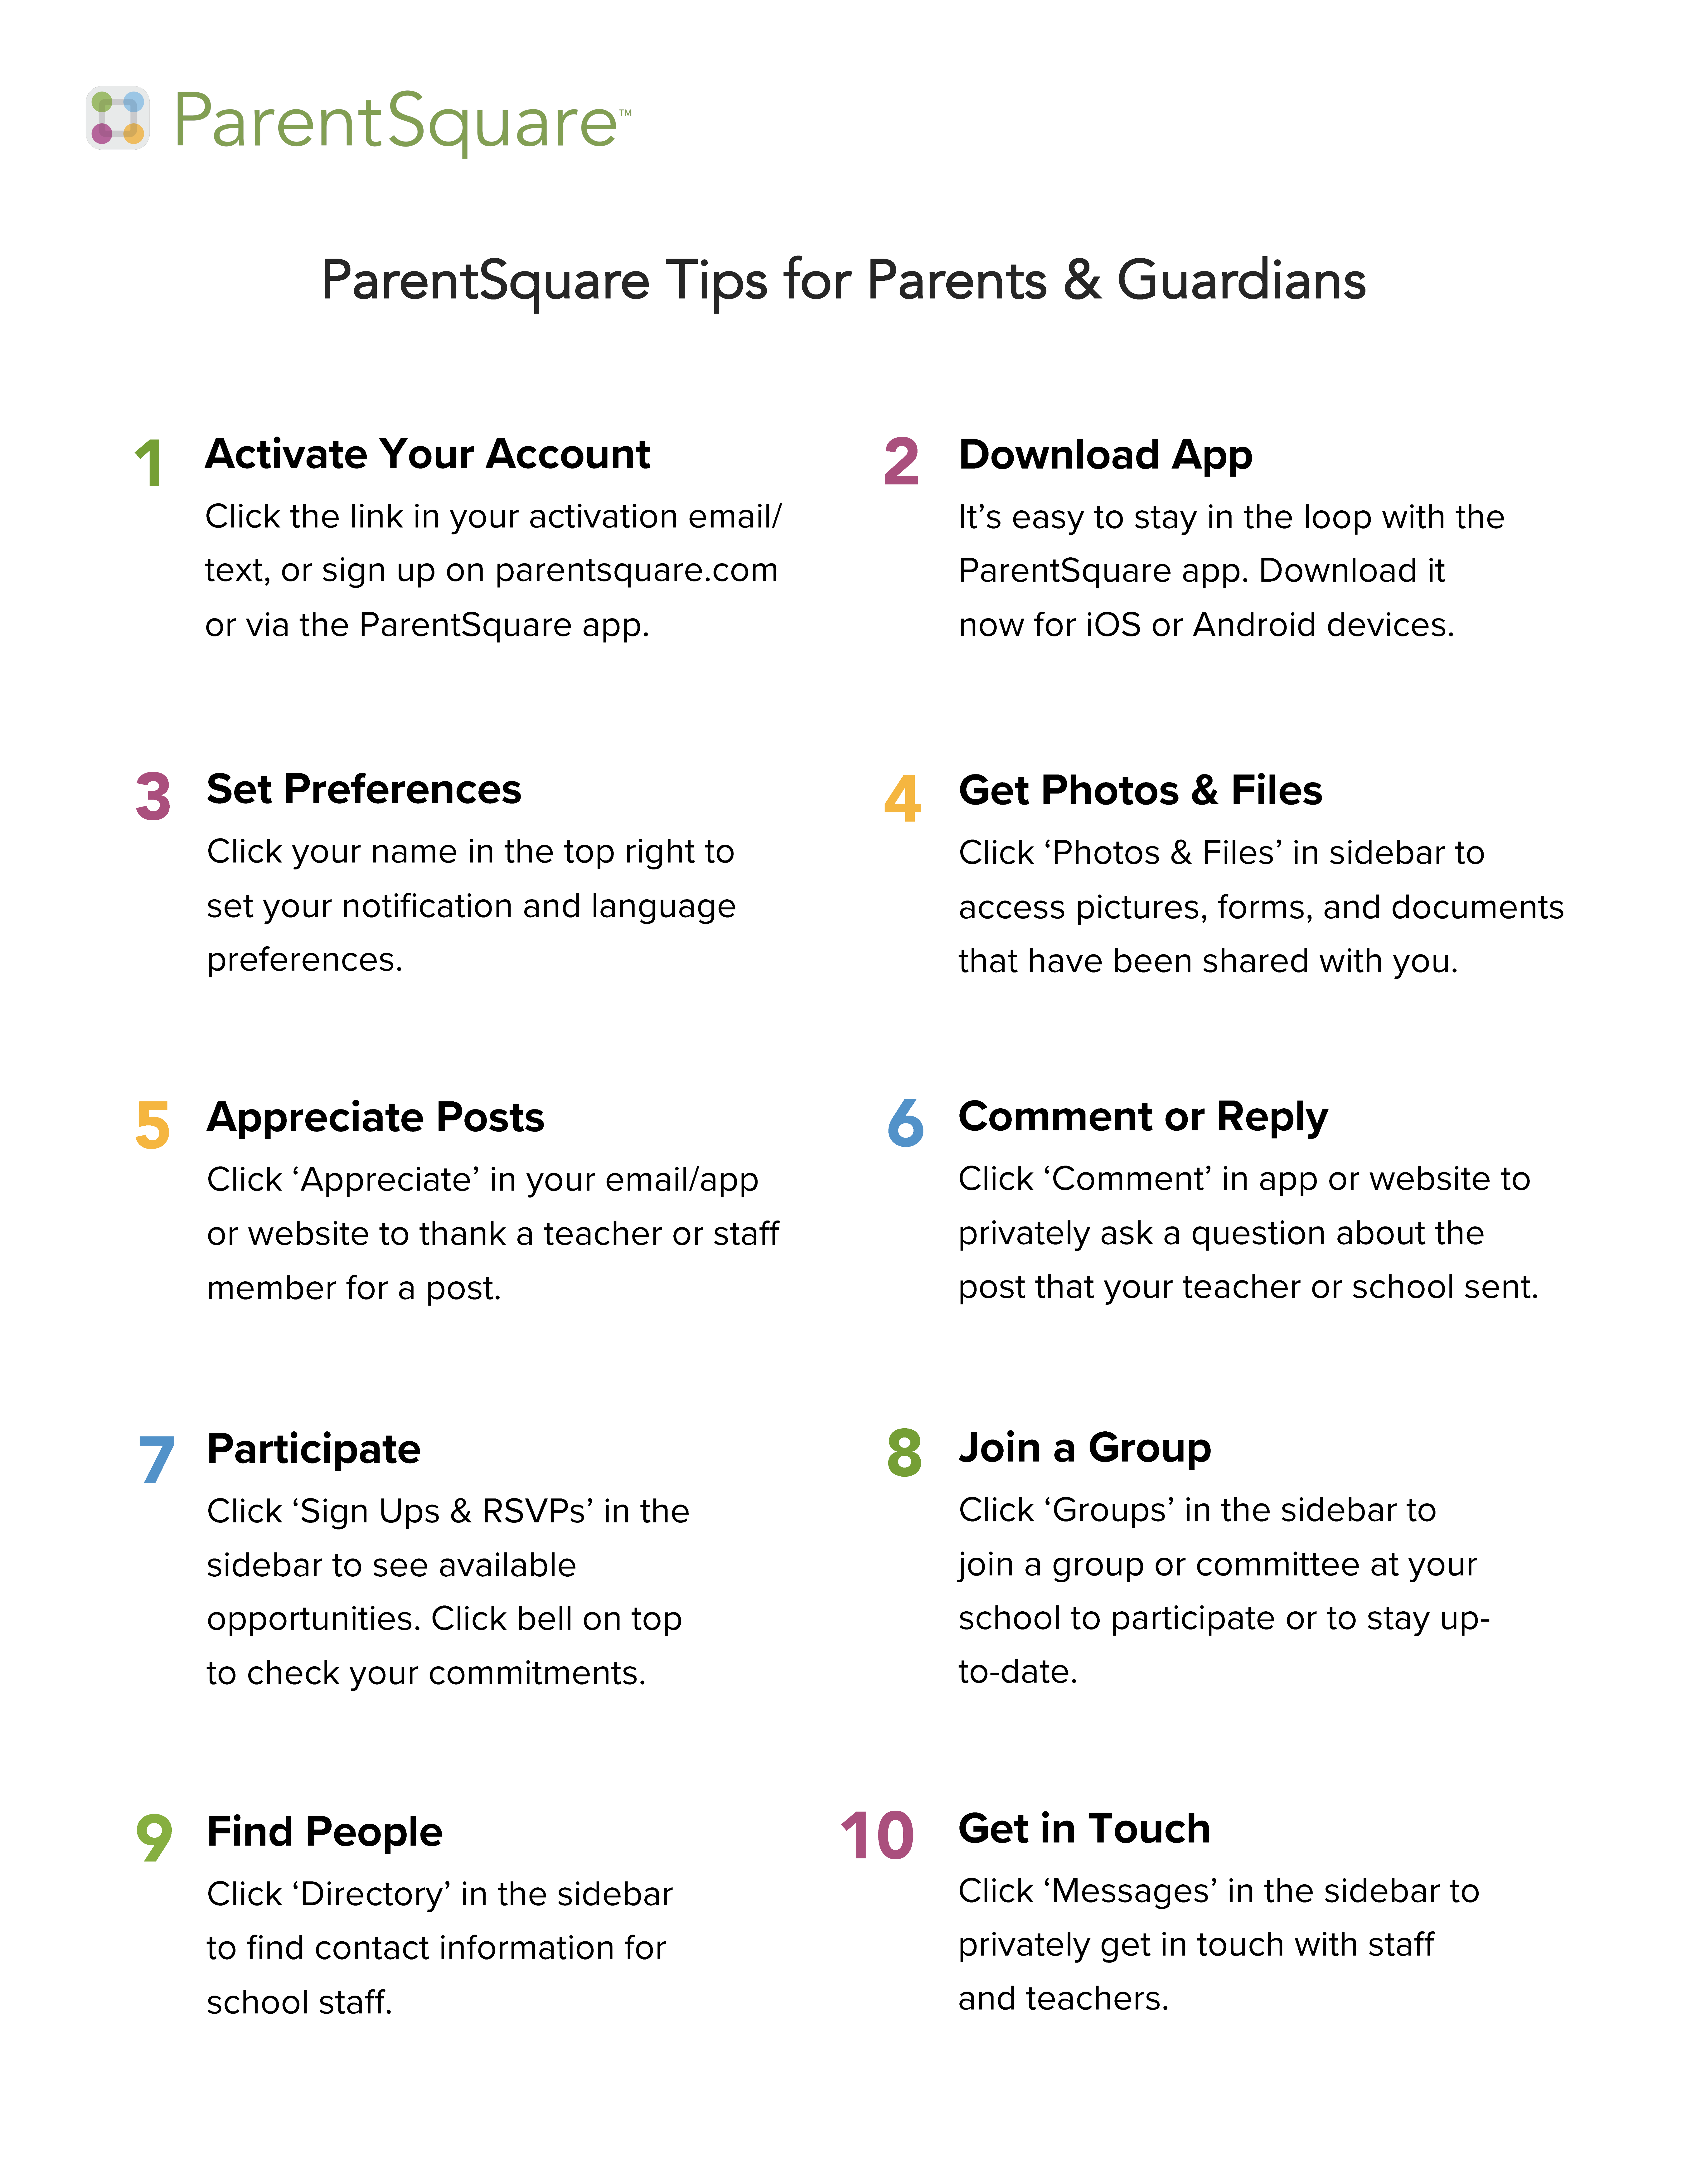 User tips for Parents when using ParentSquare